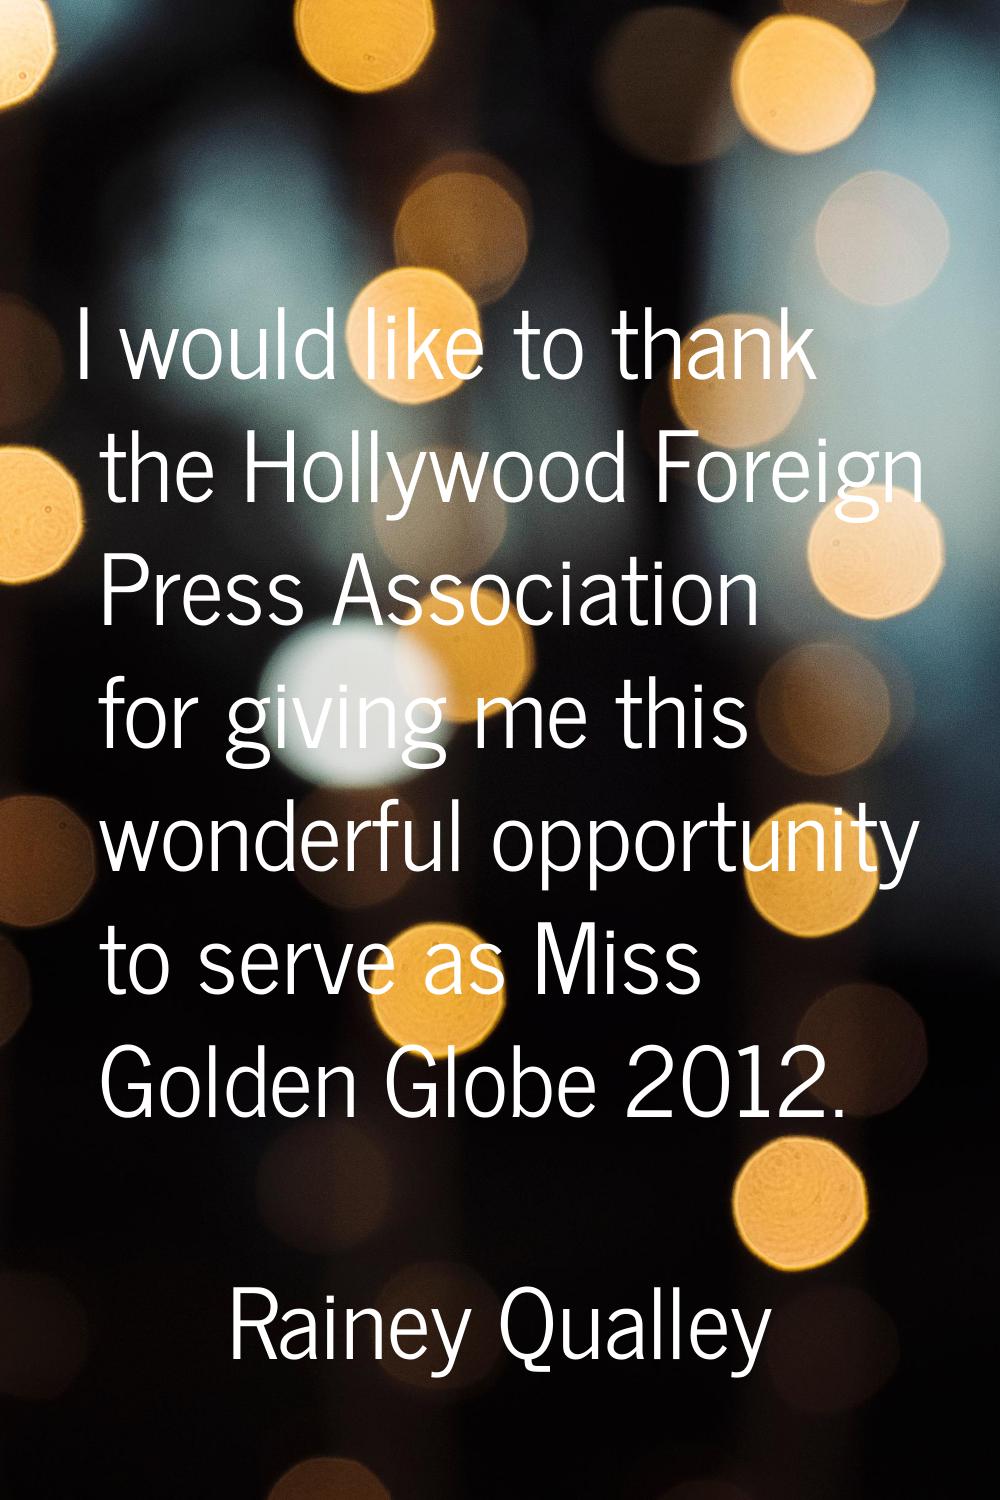 I would like to thank the Hollywood Foreign Press Association for giving me this wonderful opportun